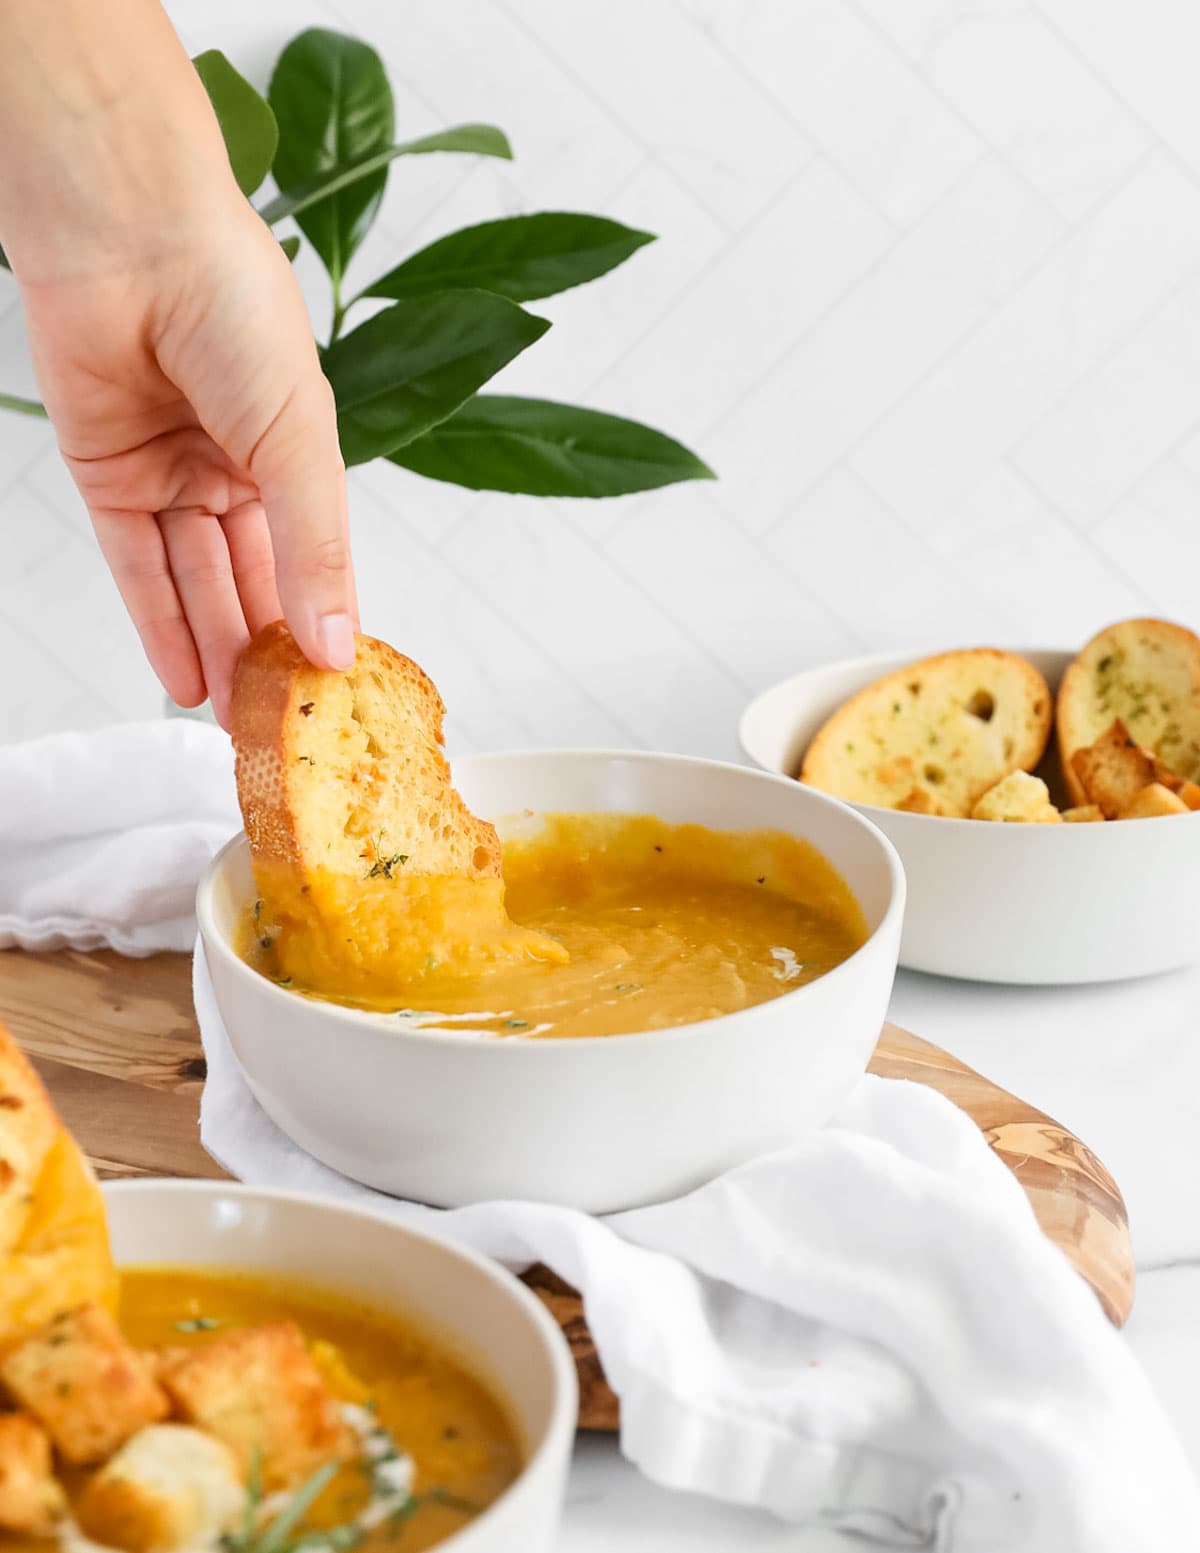 A hand dipping a piece of bread into a bowl of orange soup.